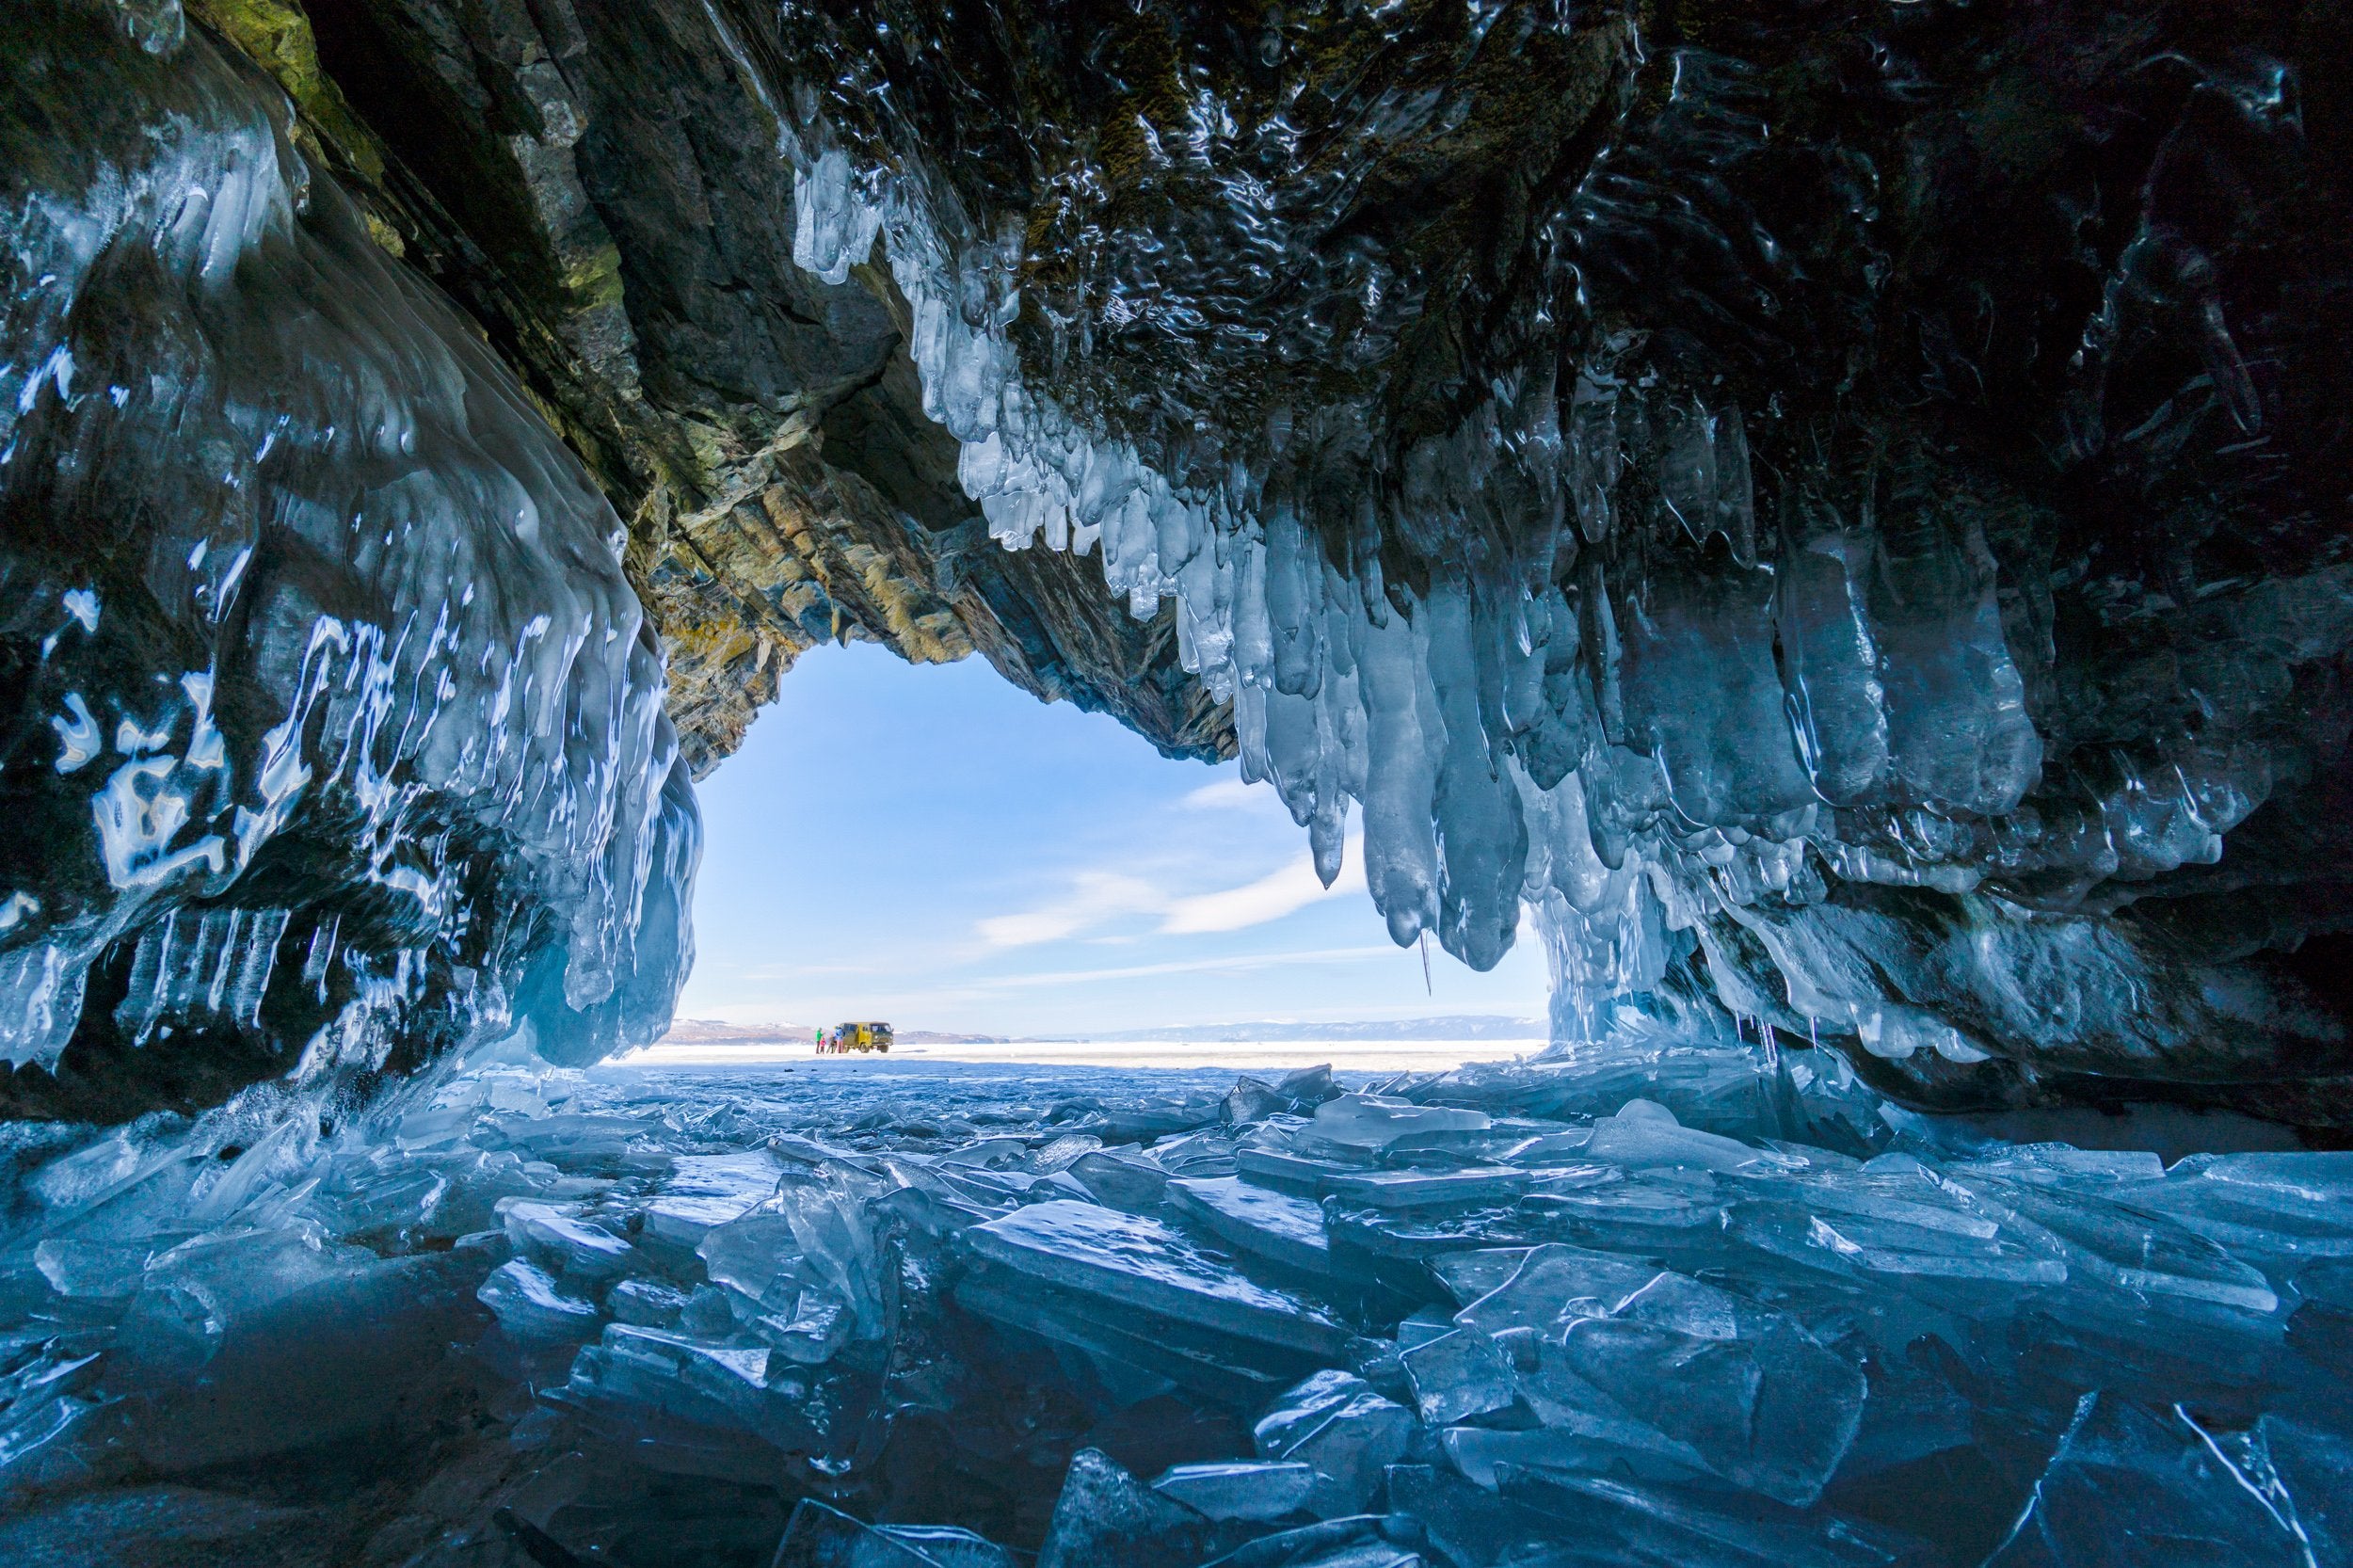 An icy cave looking out to the sky.